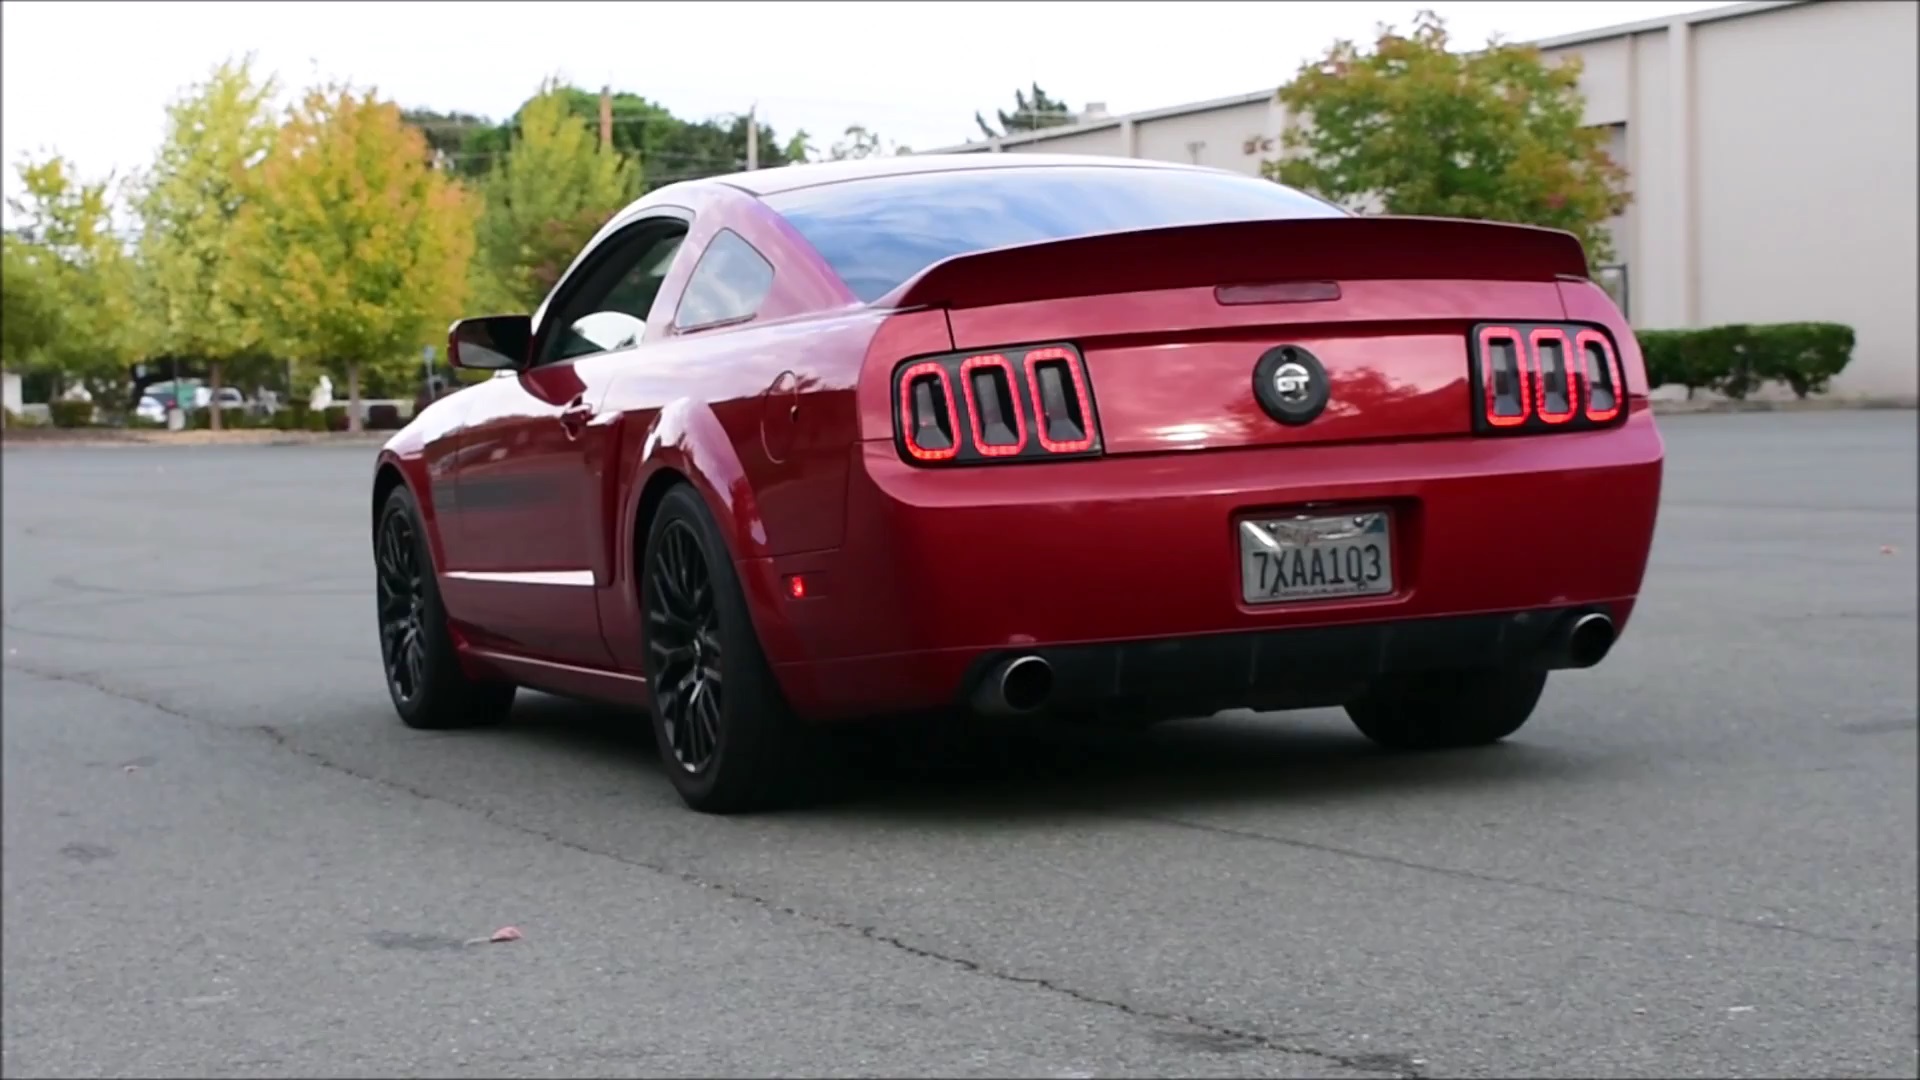 Video: 2009 Ford Mustang GT Exhaust Sound